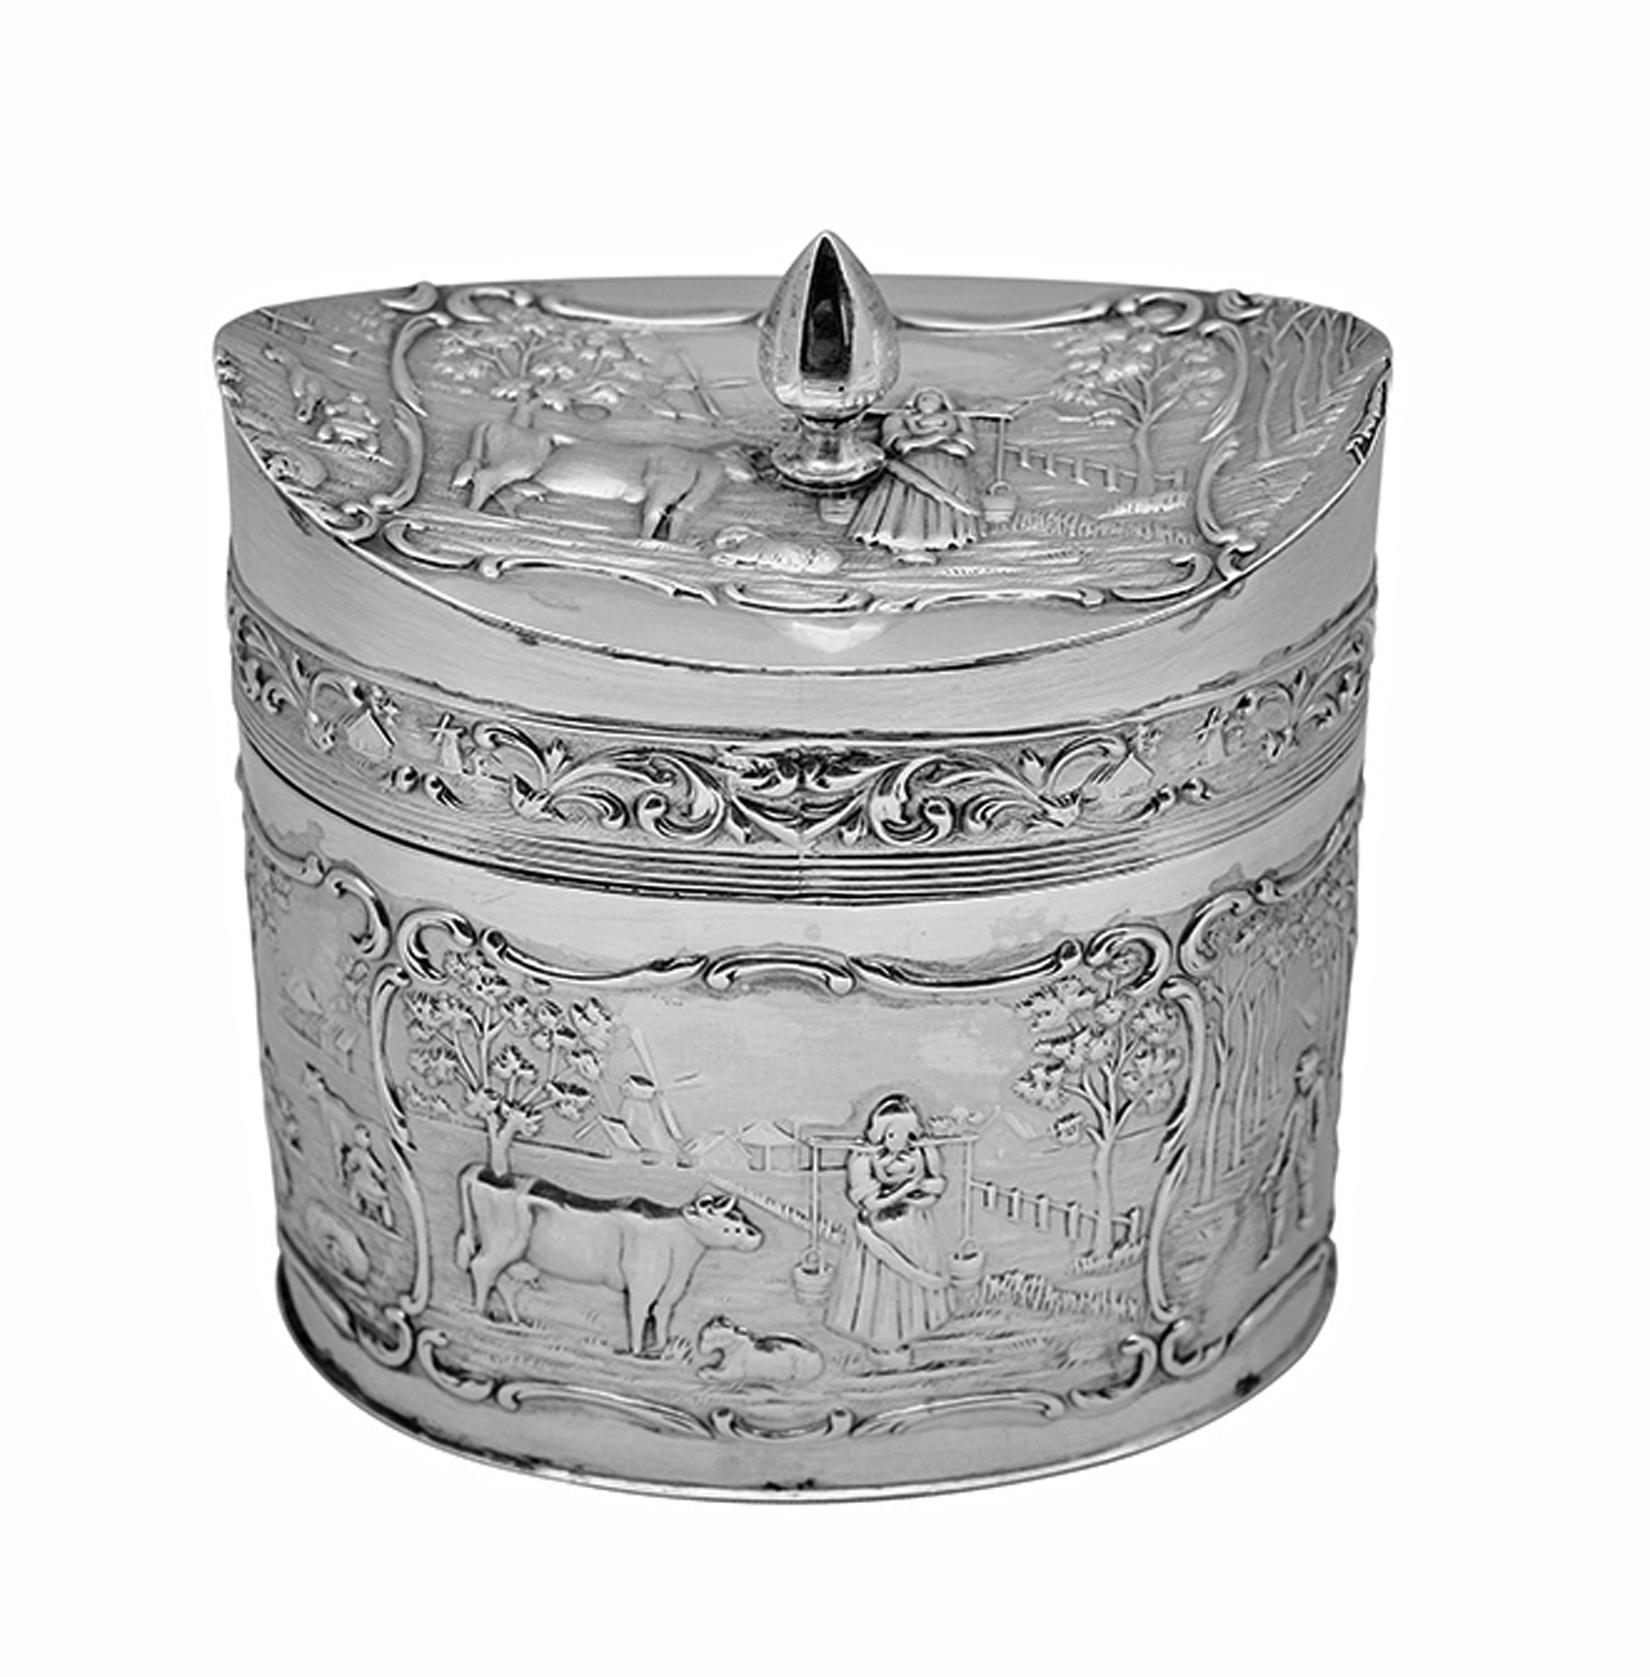 Antique silver tea caddy, H. Hooykaas-Schoonhoven Silber Fabrik, Netherlands circa 1900. Oval shape with hinged and concave cover. Chased and engraved scenes of country life in scrolled frames, milkmaids and cows against a background of windmills